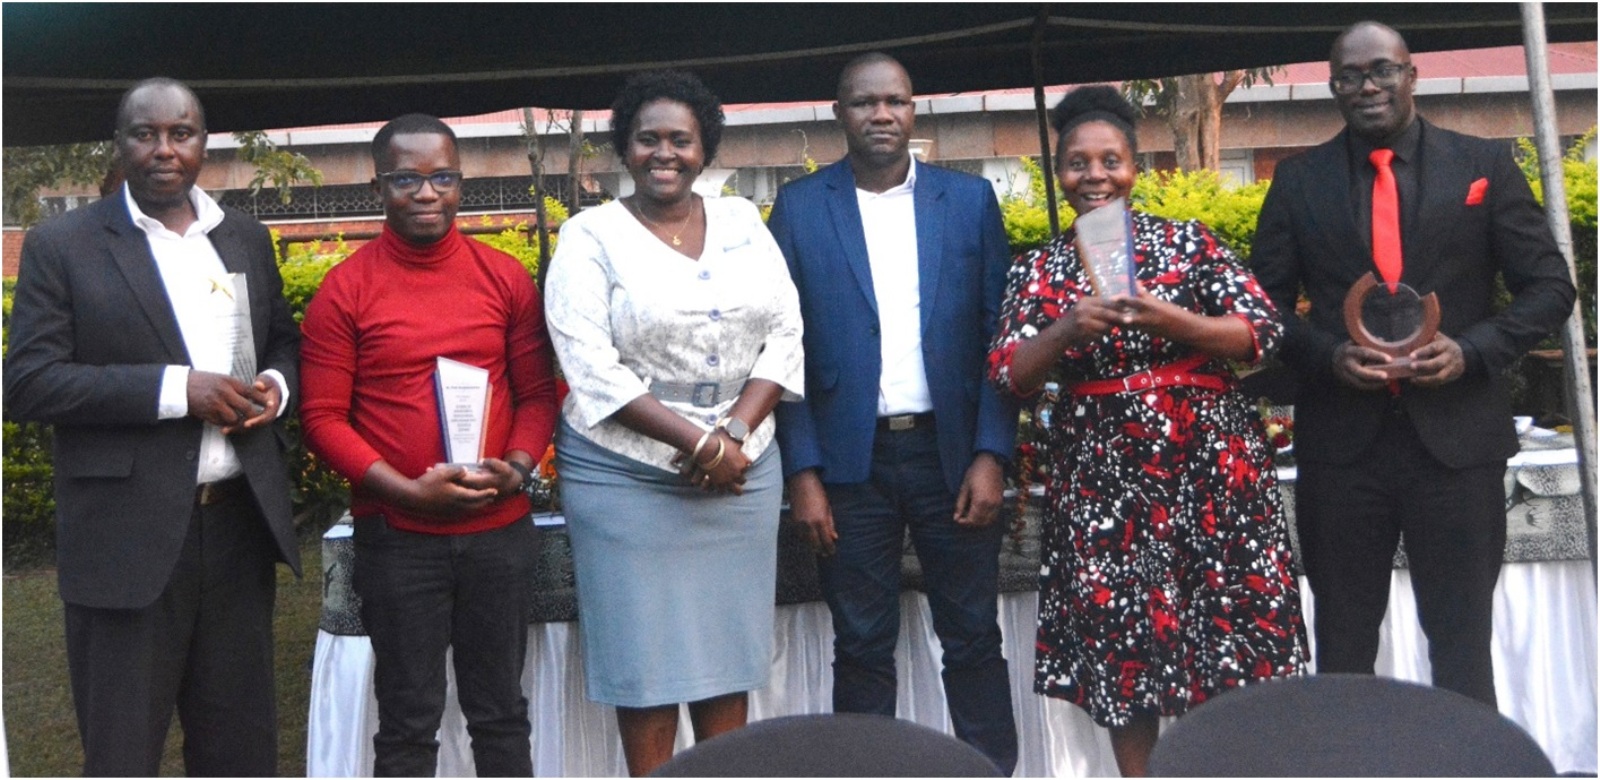 Some of the staff that were sent off pose for a picture after receiving their plaques. CoVAB farewell for outgoing staff, 19th January 2024, Ruth Keesling Gardens, College of Veterinary Medicine, Animal Resources and Biosecurity (COVAB), Makerere University, Kampala Uganda, East Africa.